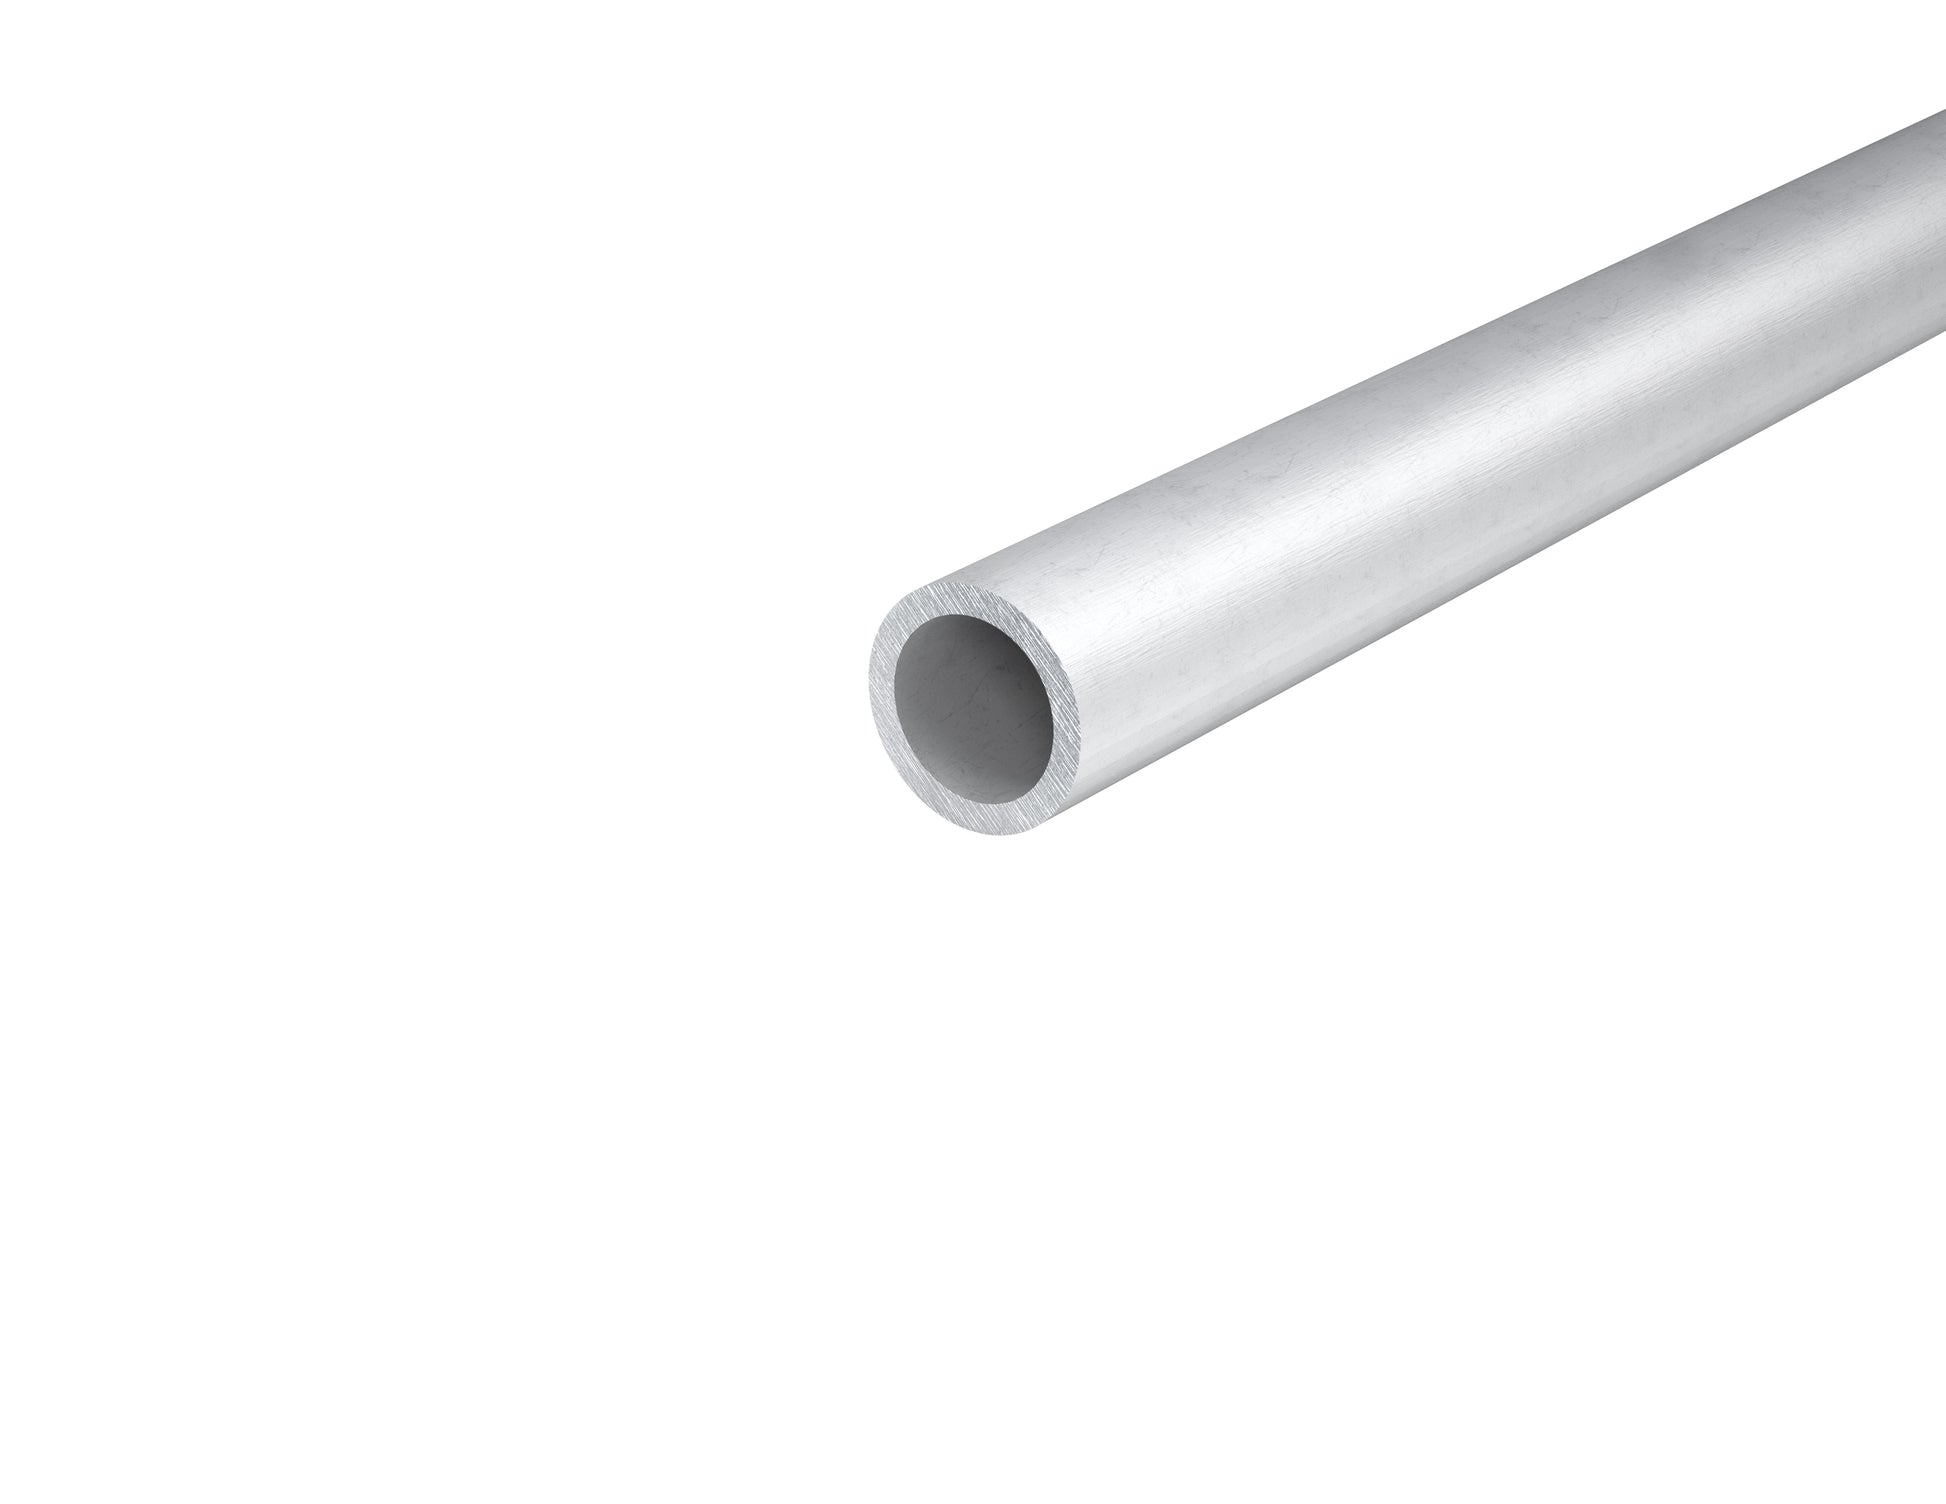 1.527" OD x 0.191" Wall Extruded Round Aluminum Tube 6063-T5 Approximately 1.5" OD x 3/16" Wall Aluminum Tubing